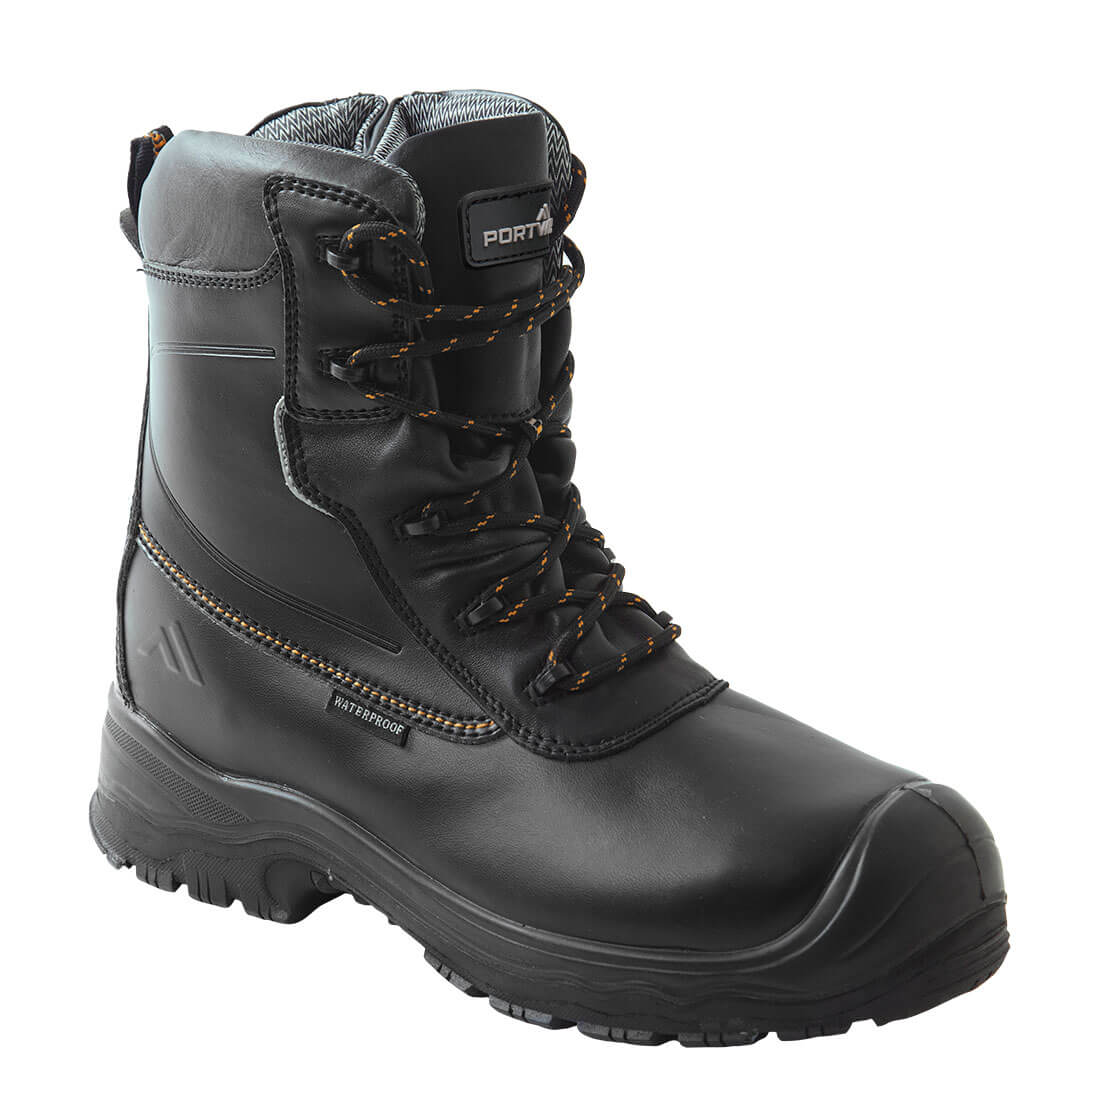 Portwest Compositelite Traction 7 inch (18cm) Safety Boot S3 HRO CI WR Boots FD02